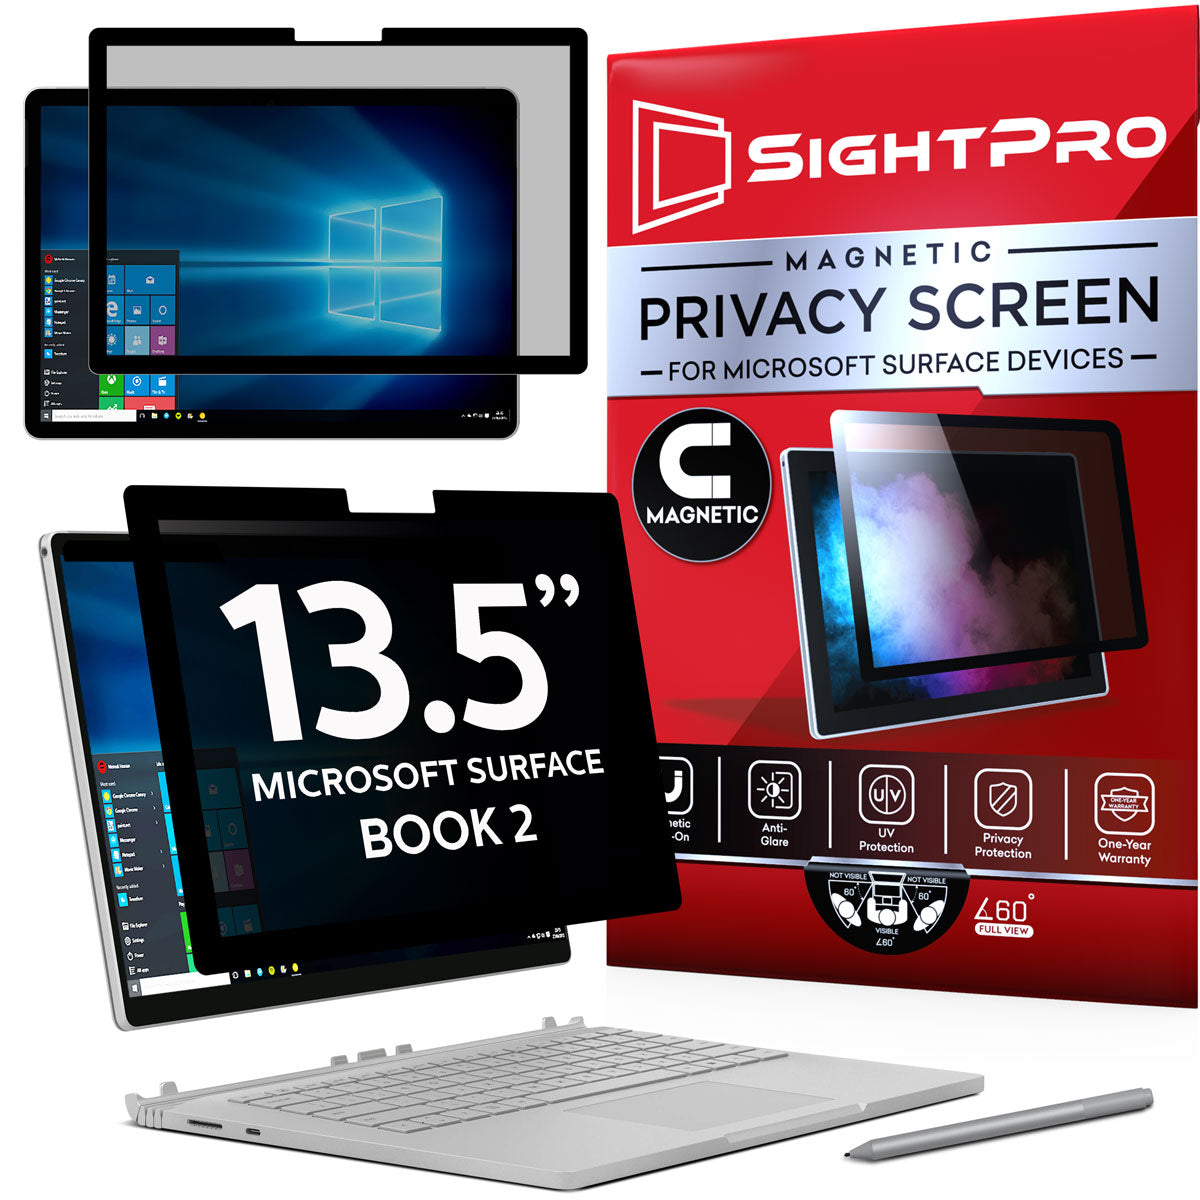 SightPro Magnetic Privacy Screen for Surface Book 2 13.5